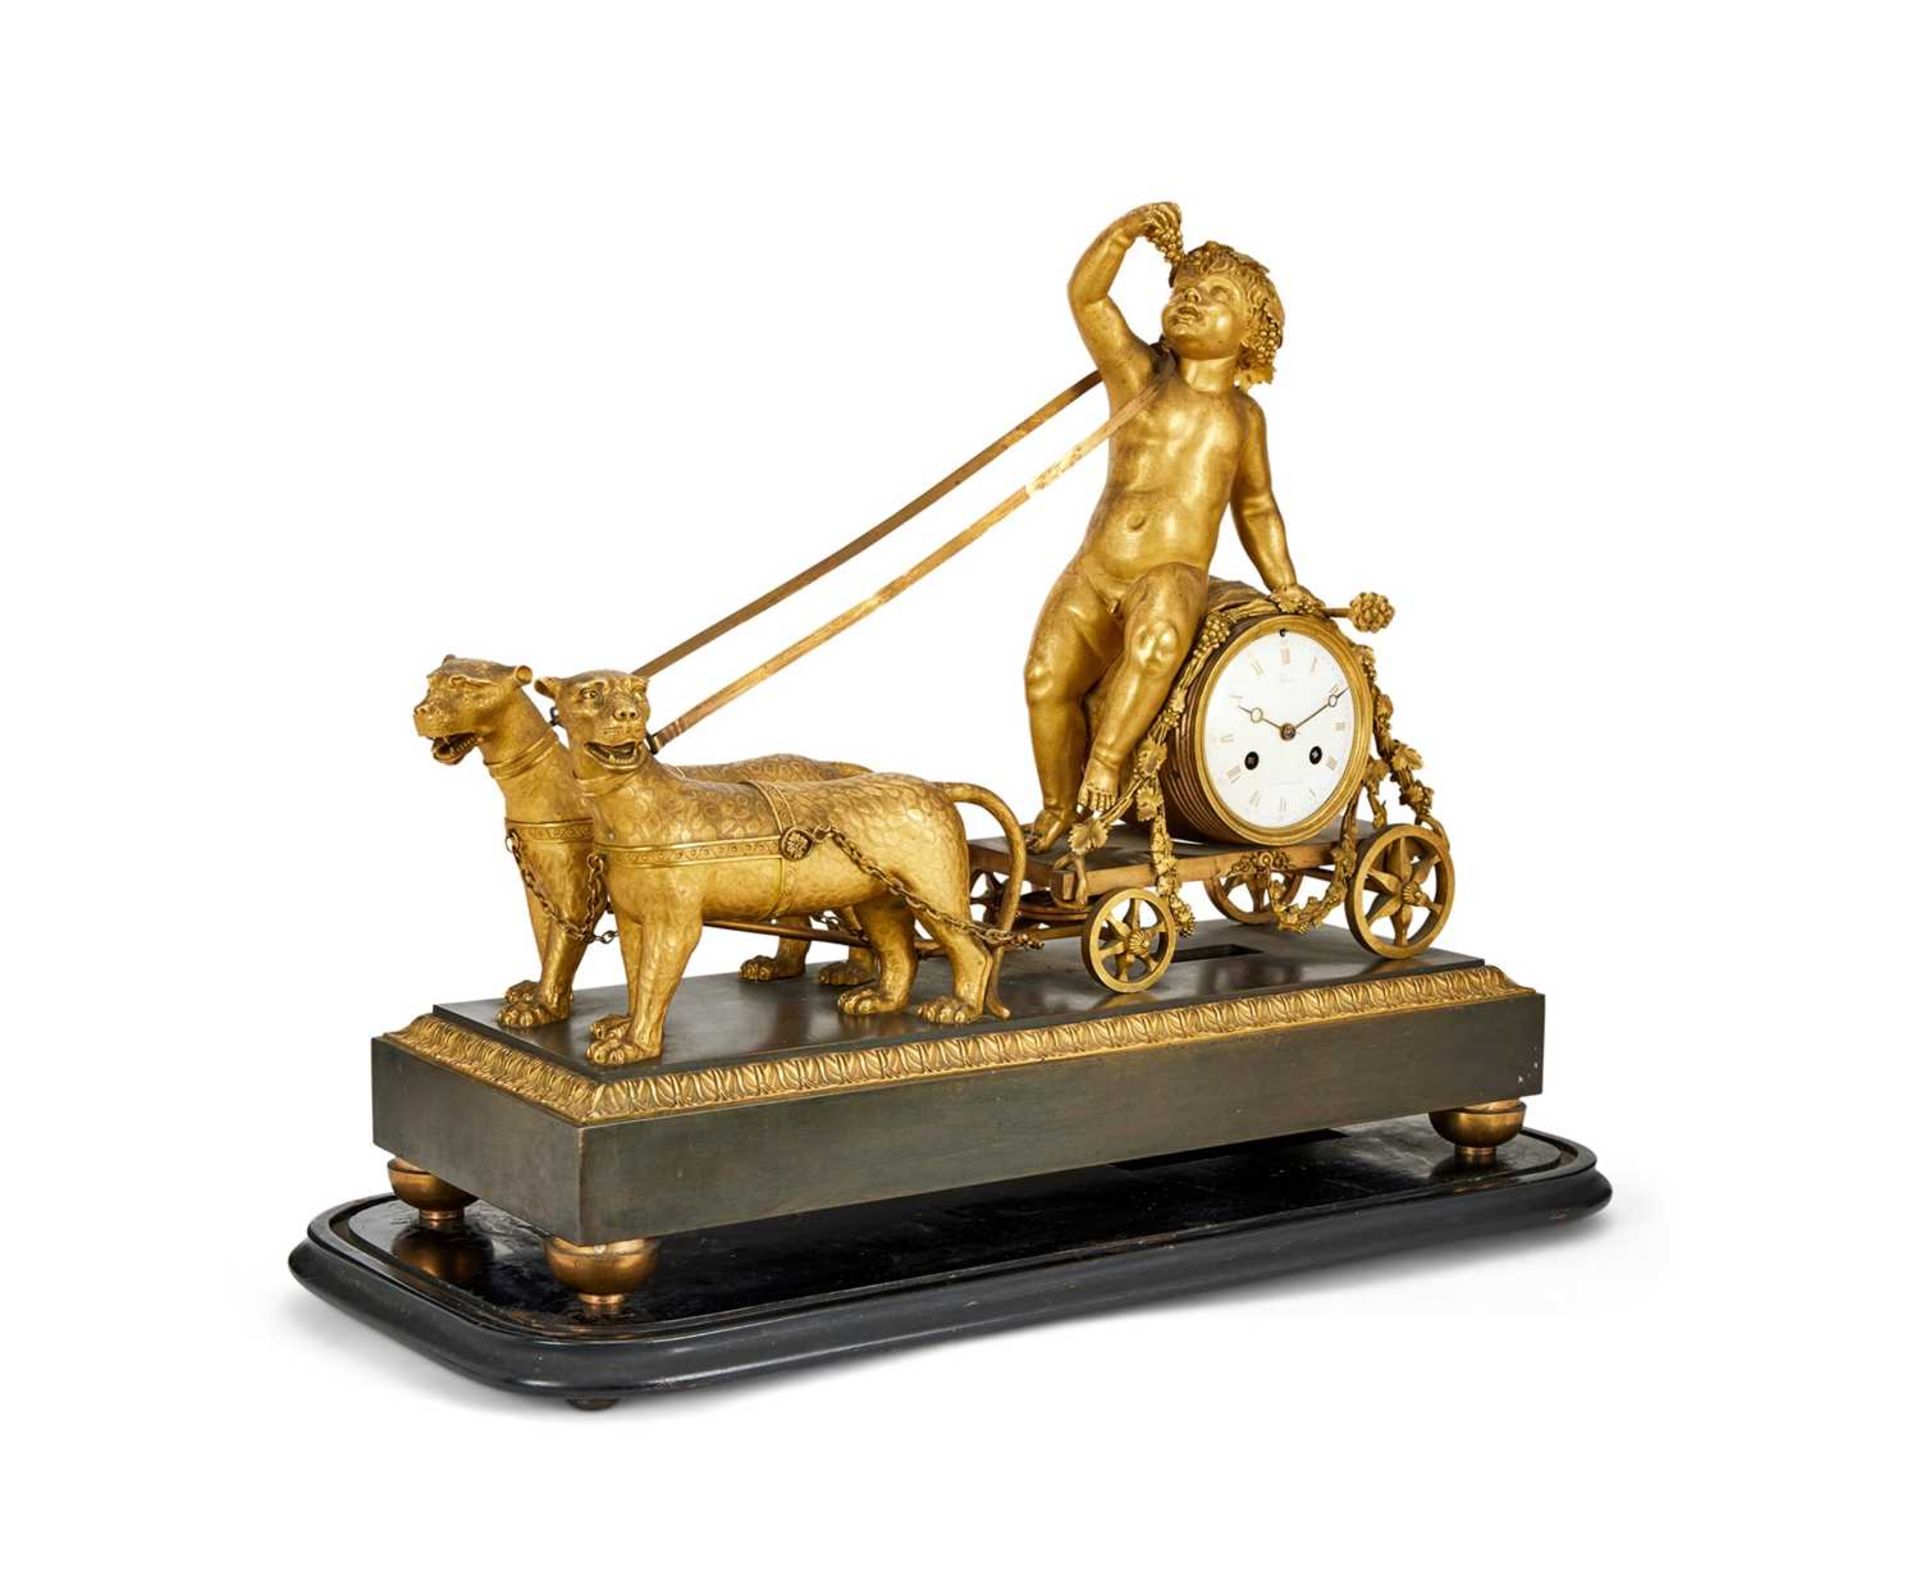 AN EXCEPTIONAL LATE 18TH CENTURY LOUIS XVI PERIOD GILT BRONZE MANTEL CLOCK - Image 2 of 5